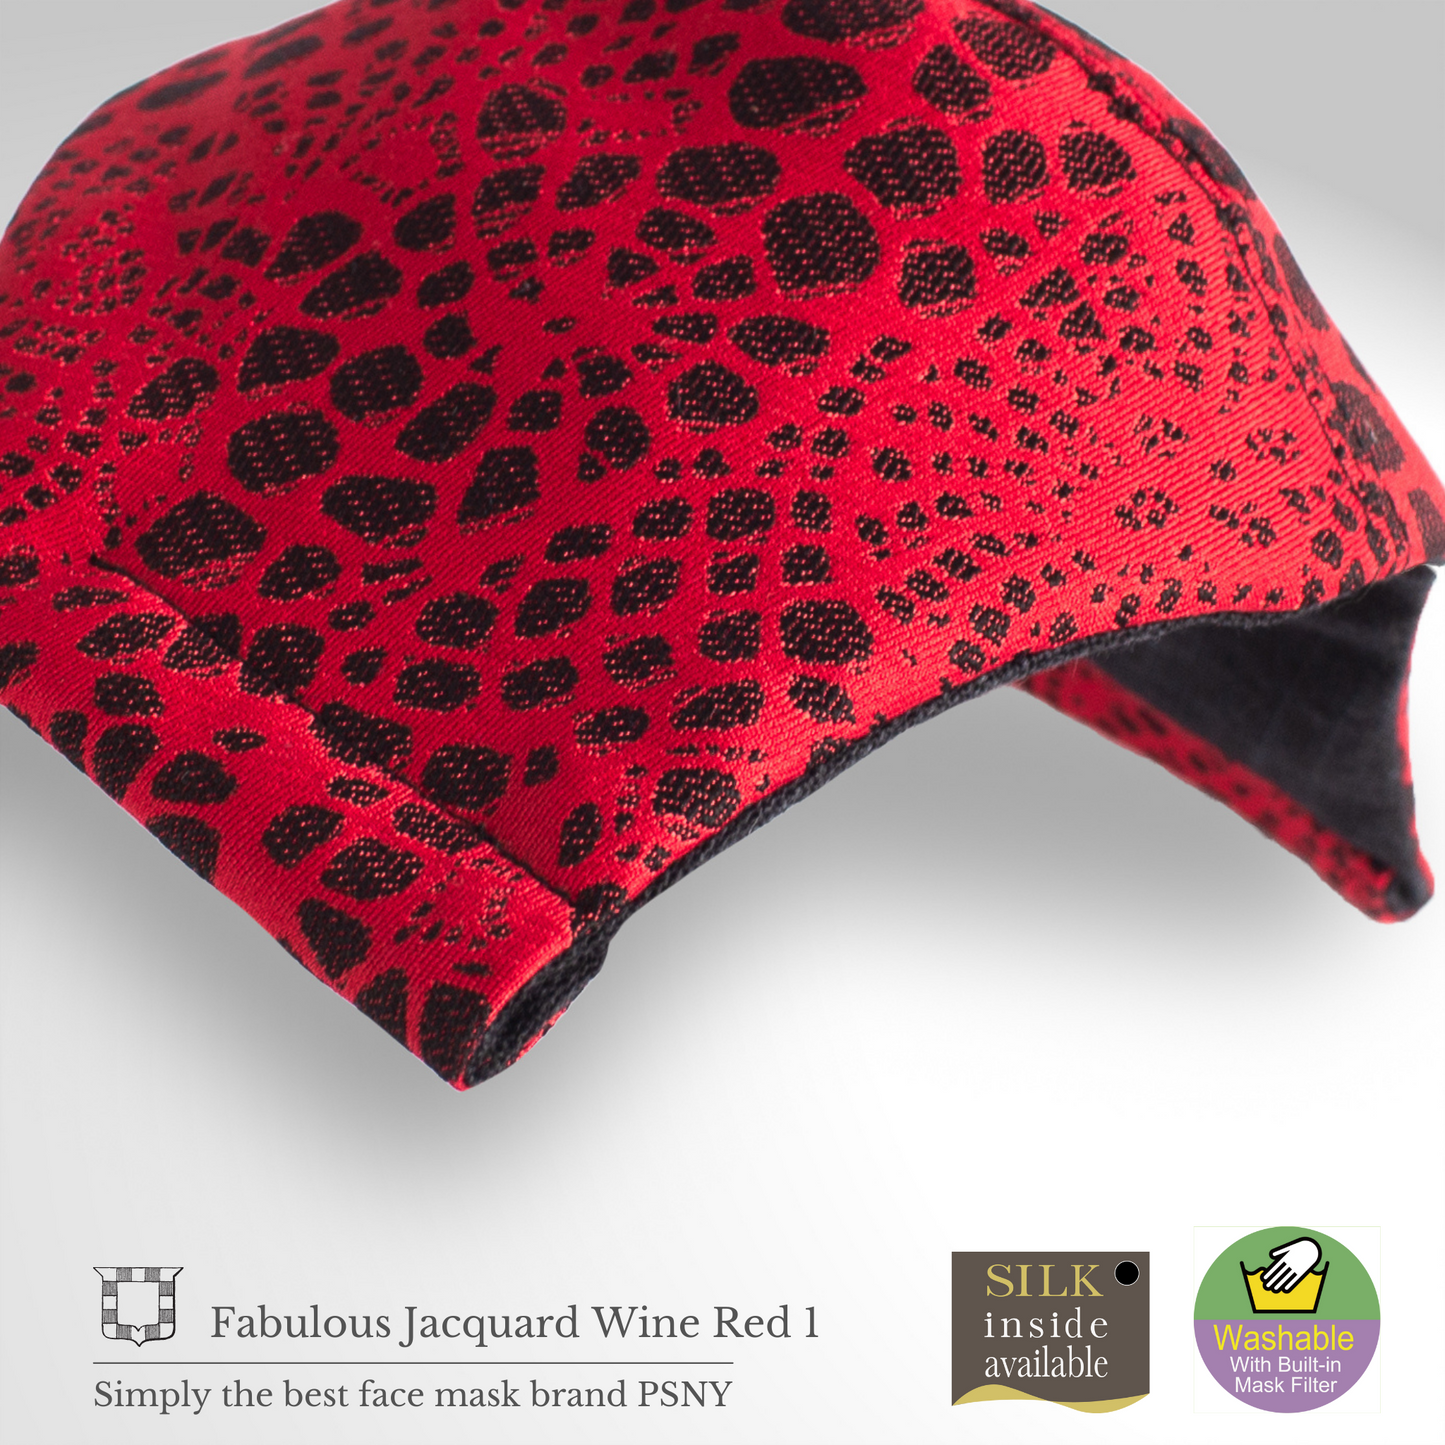 PSNY Jacquard Woven Wine Red 1 Mask with Nonwoven Filter 3D Adult Beautiful Mask FG17